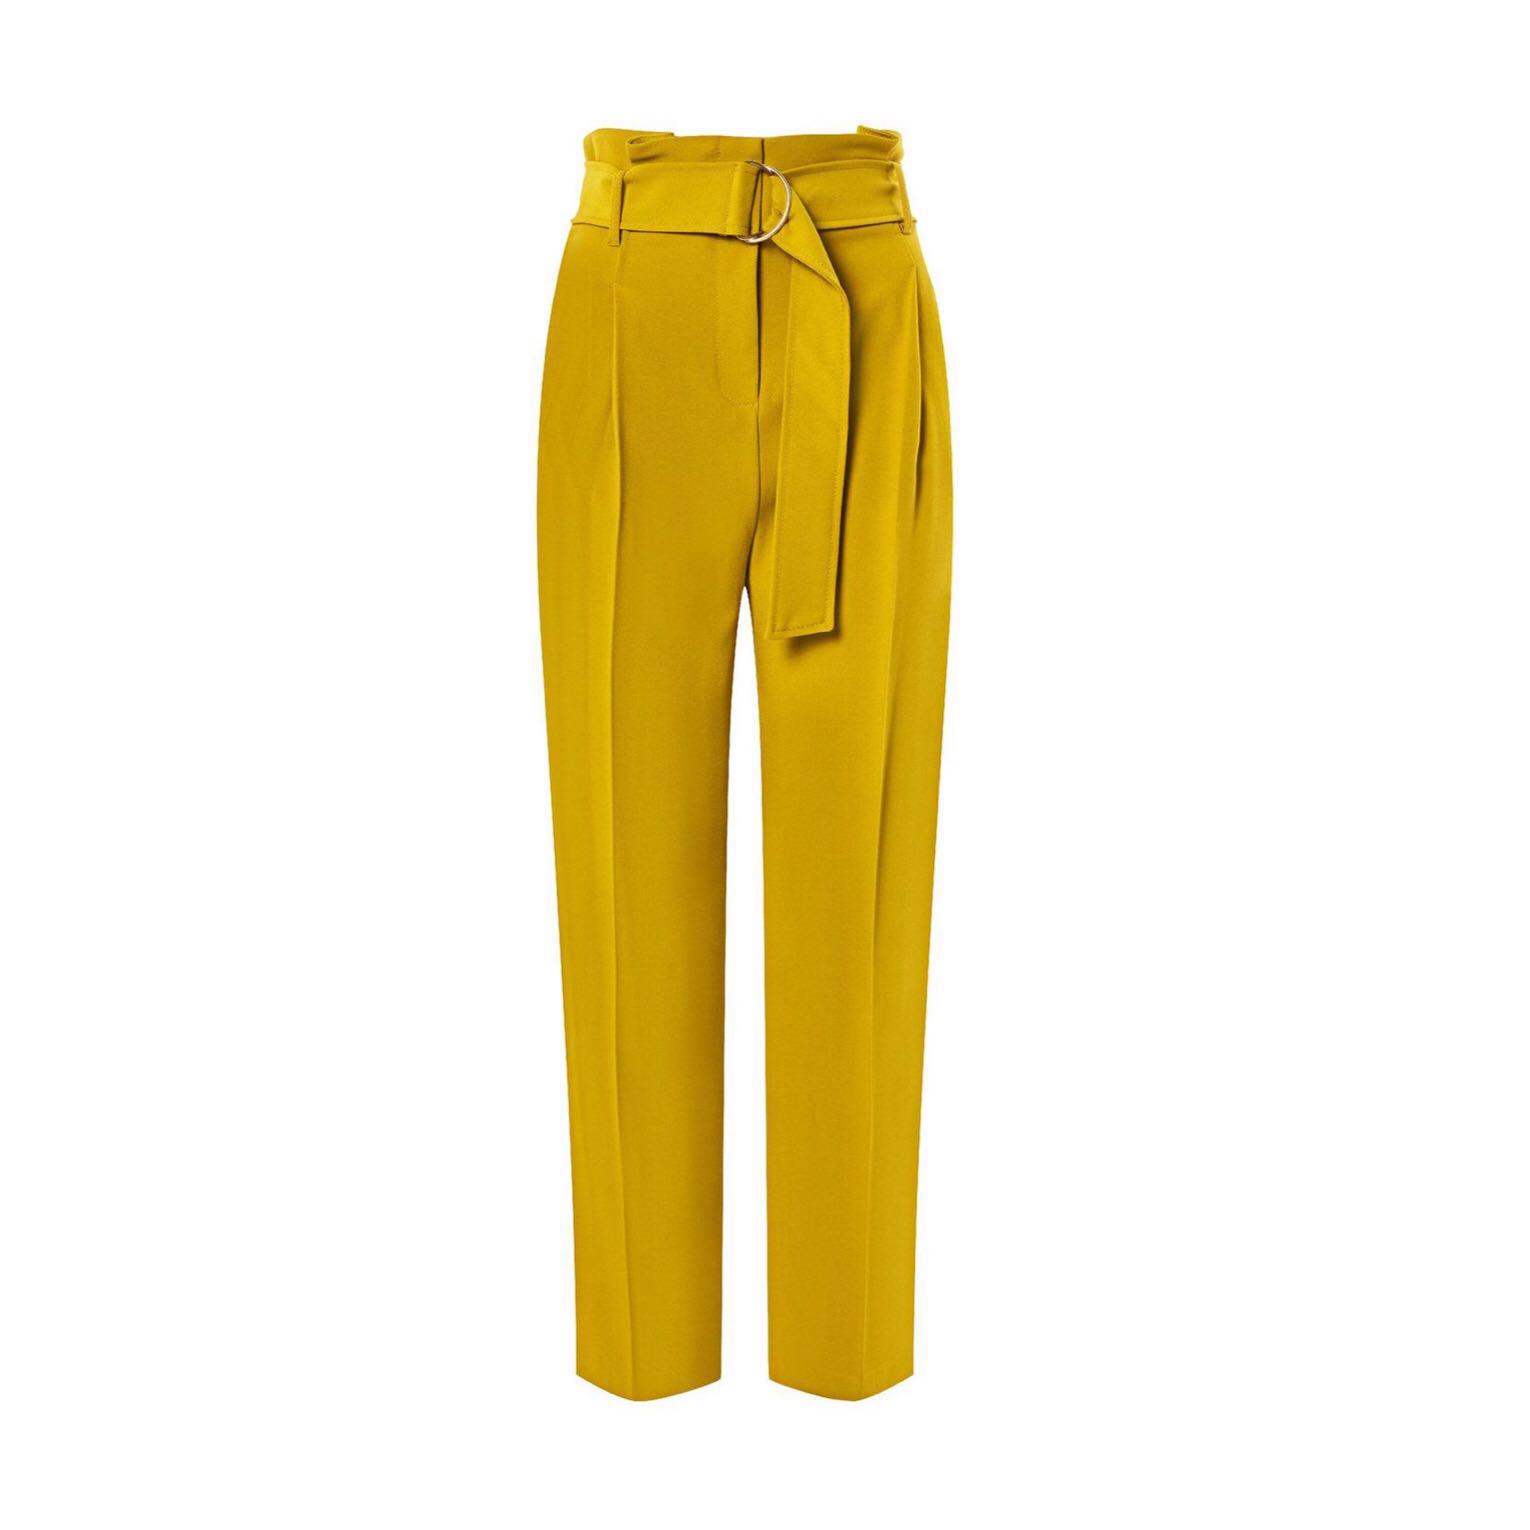 Topshop coord straight leg wavy print trouser in yellow  ASOS